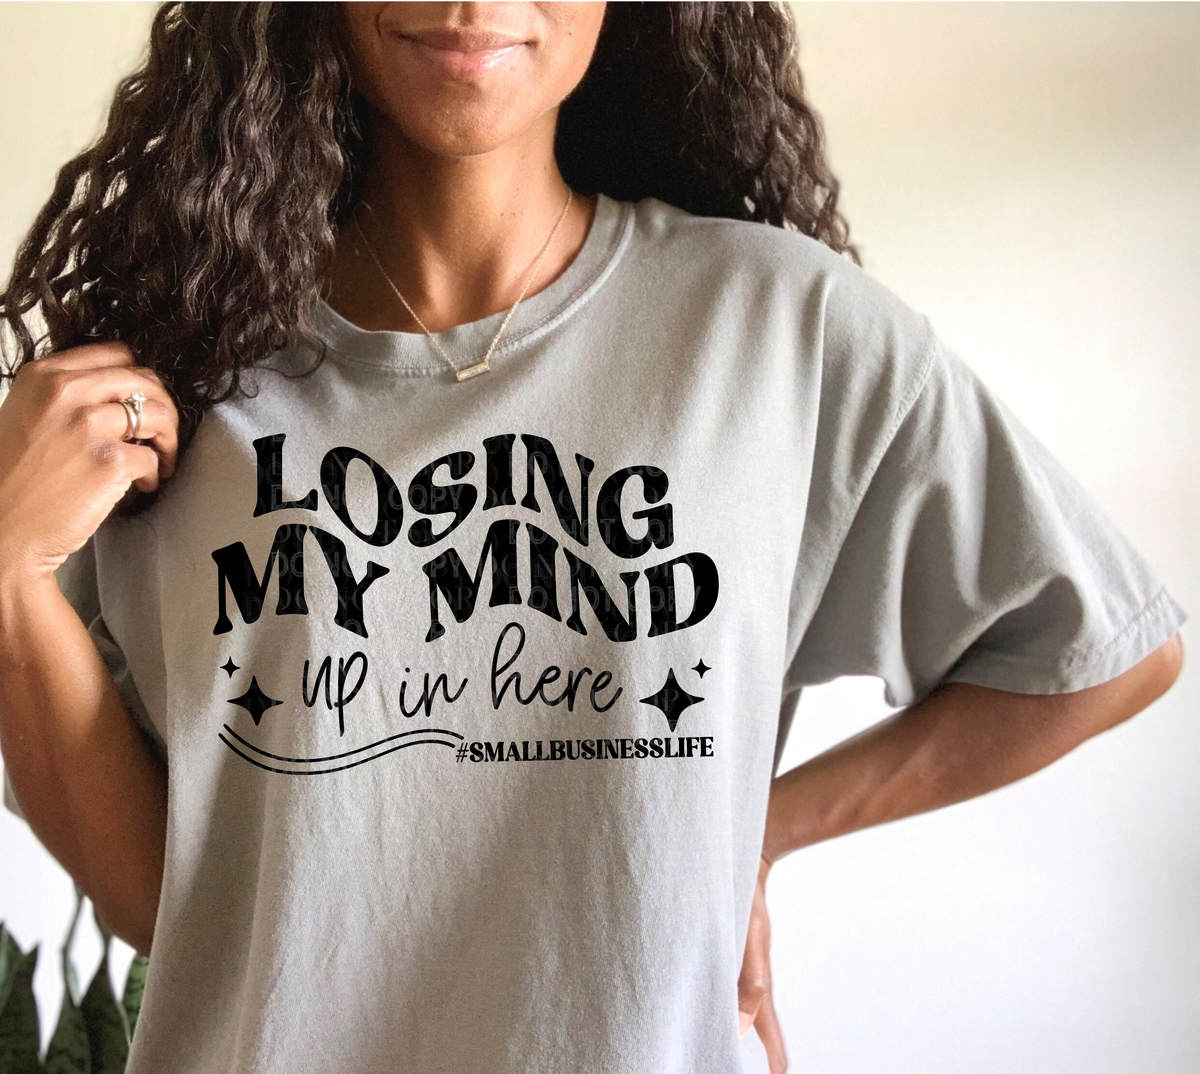 Losing my mind: Small business